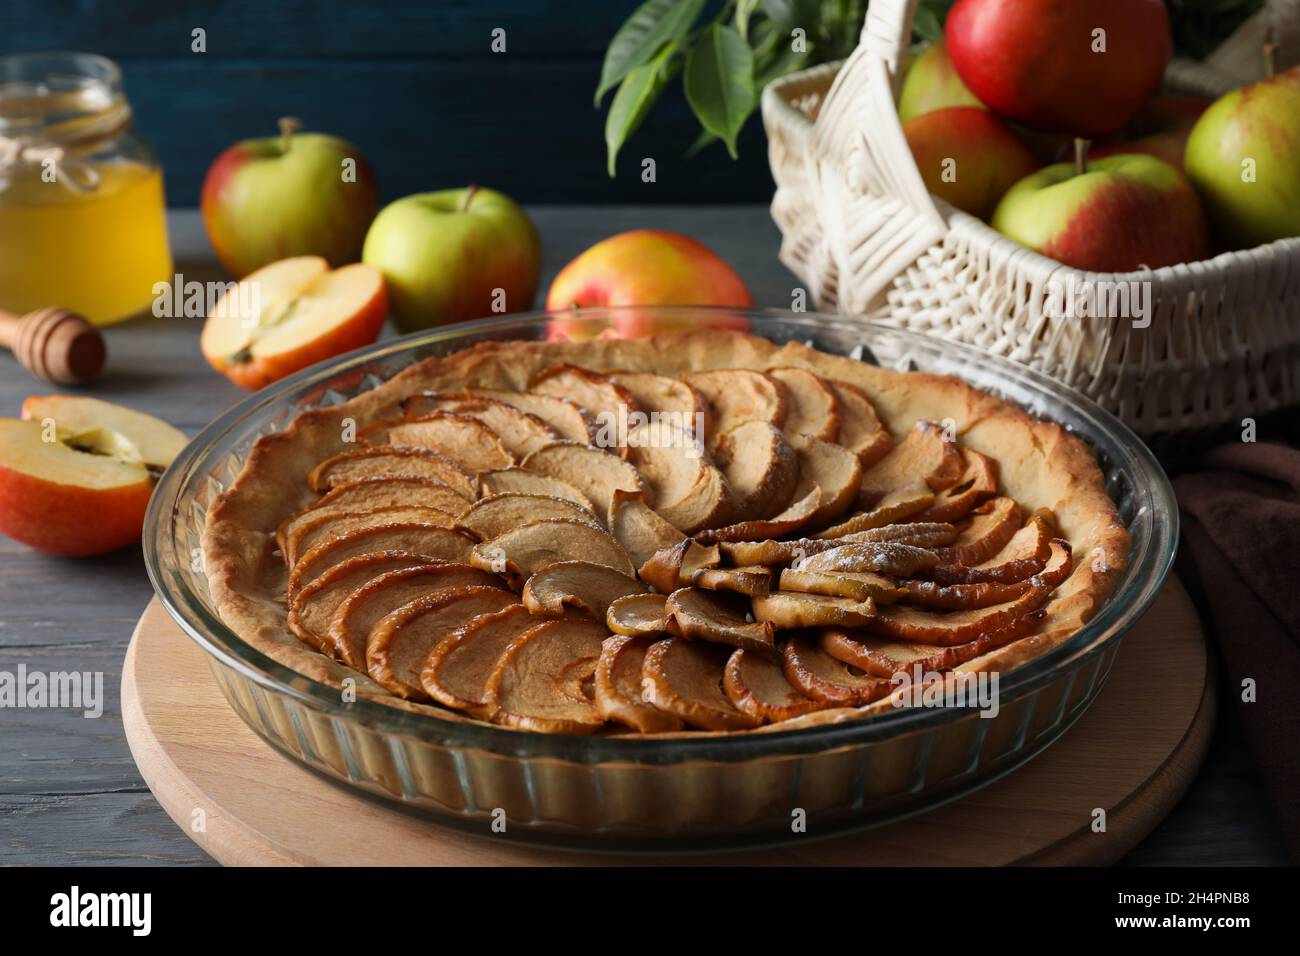 Concept of tasty food with apple pie on wooden table Stock Photo